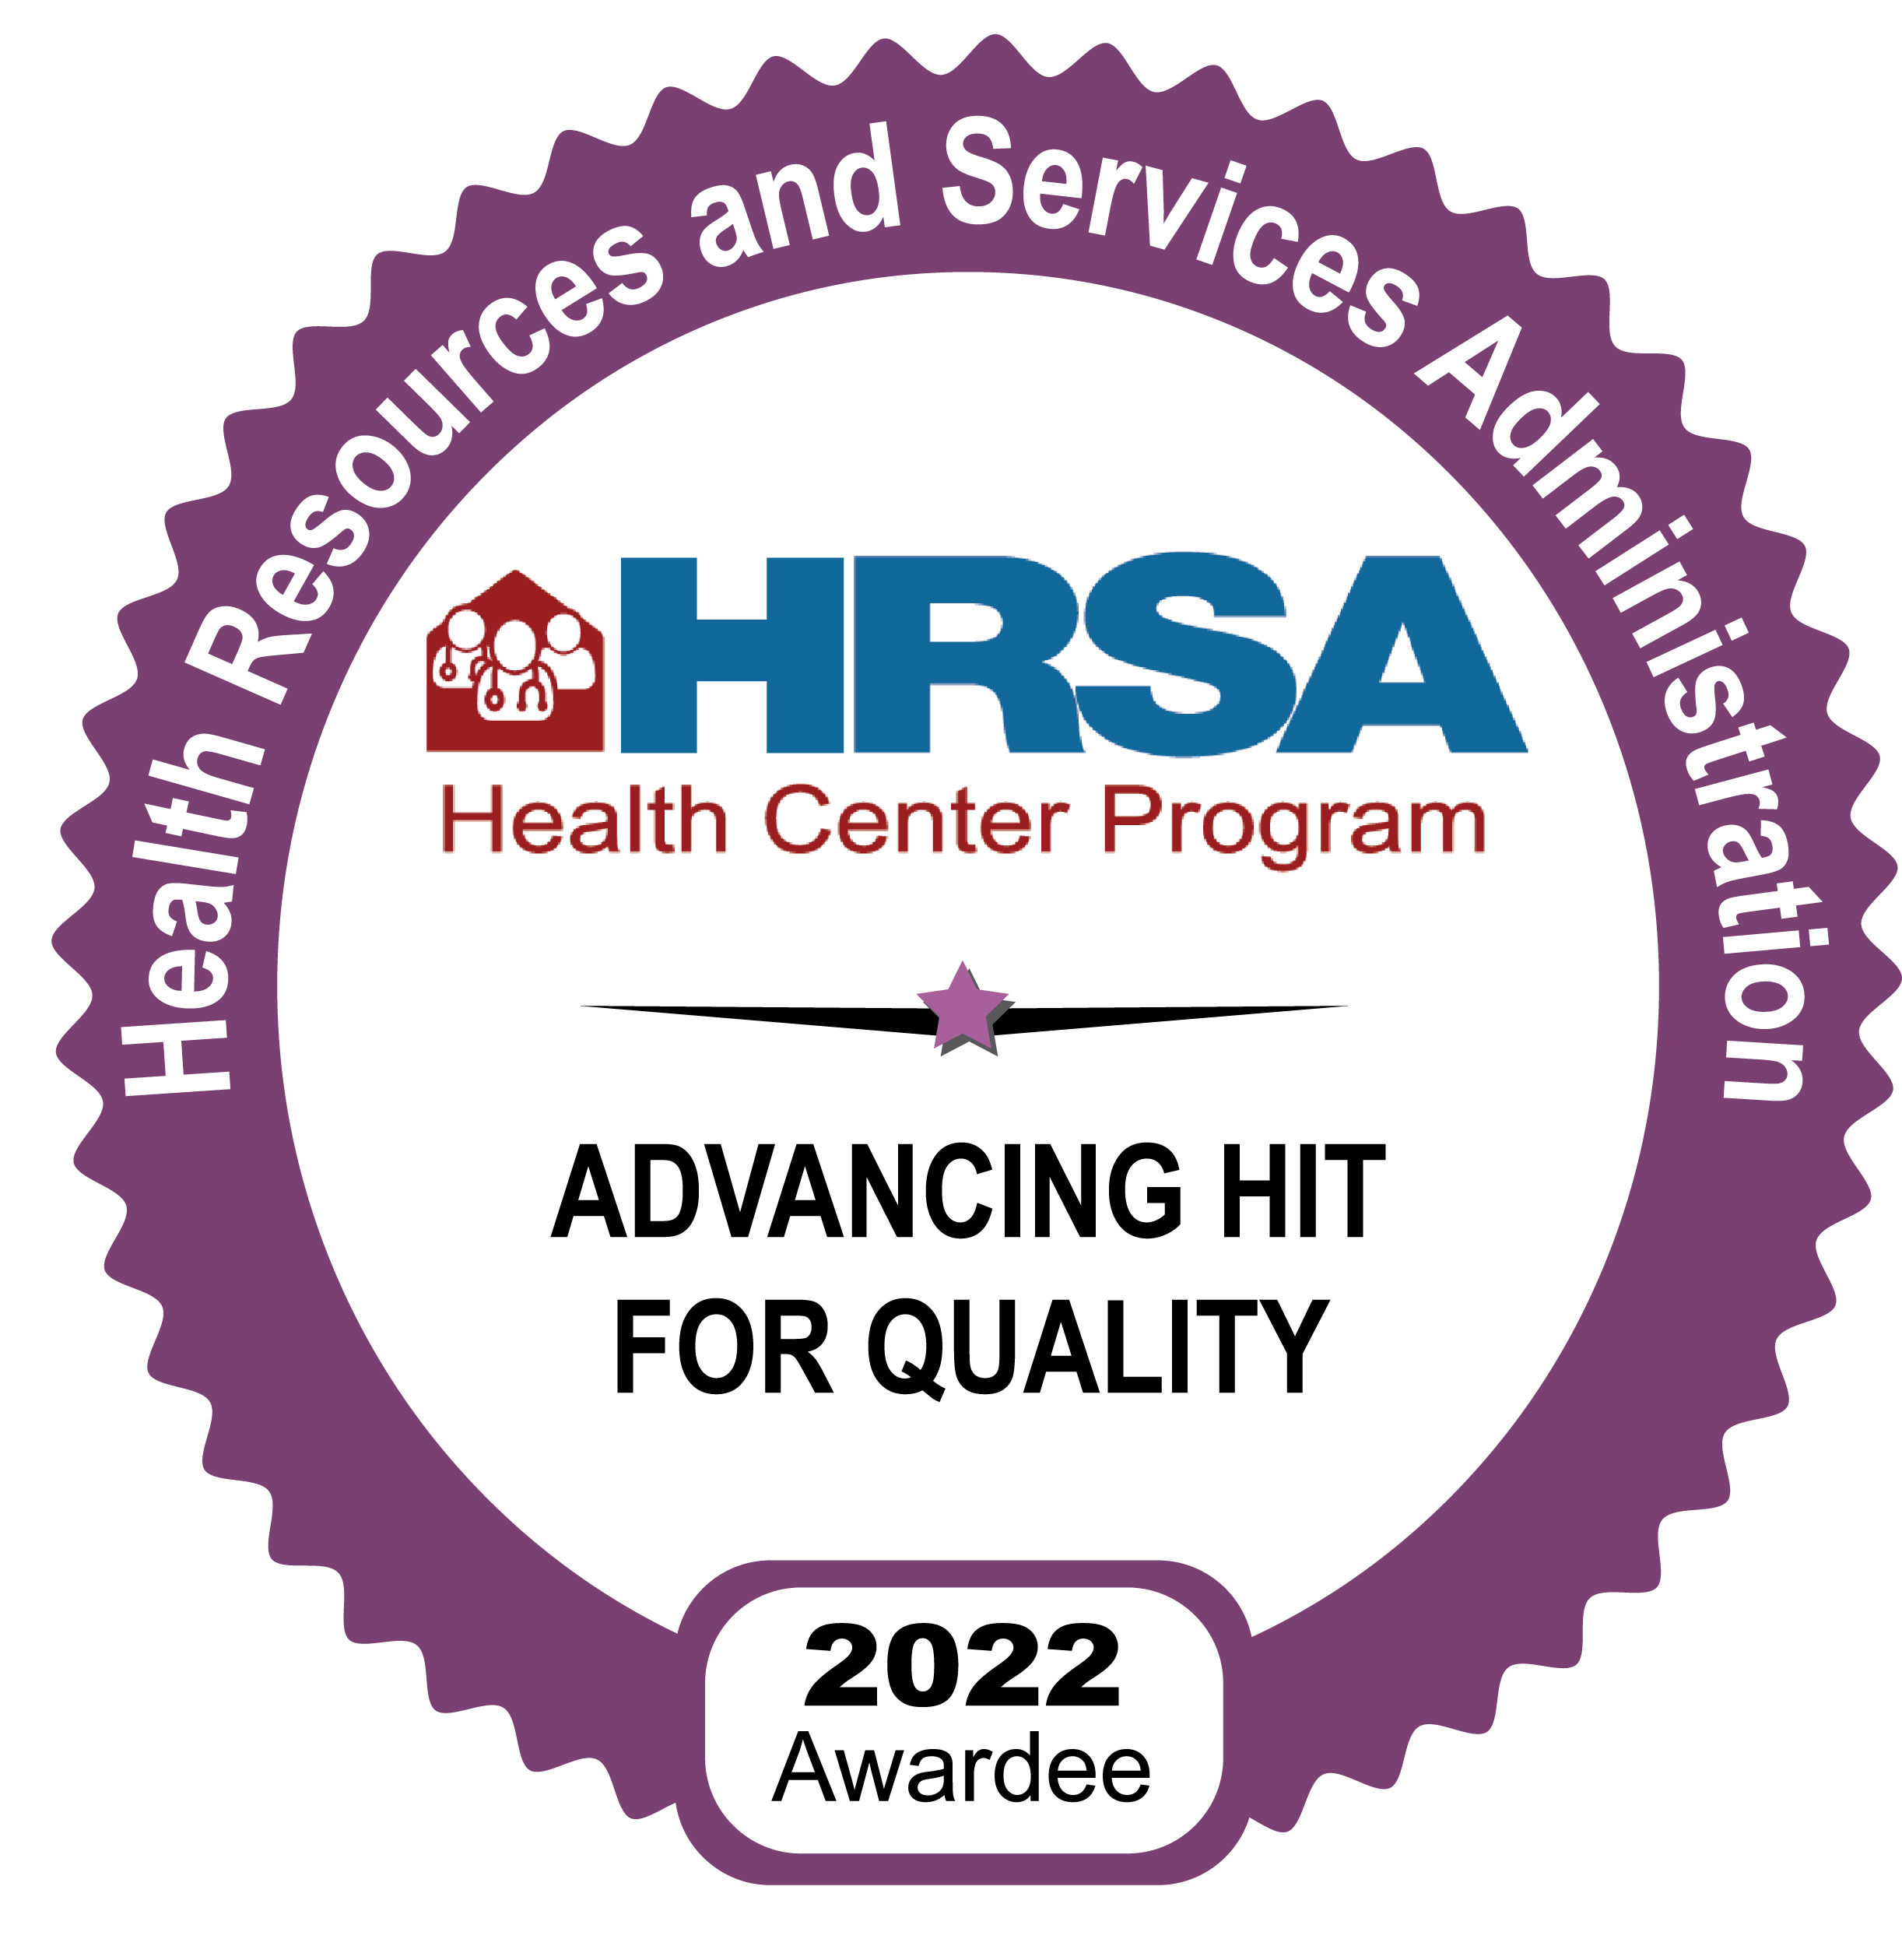 Advancing Hit for Quality